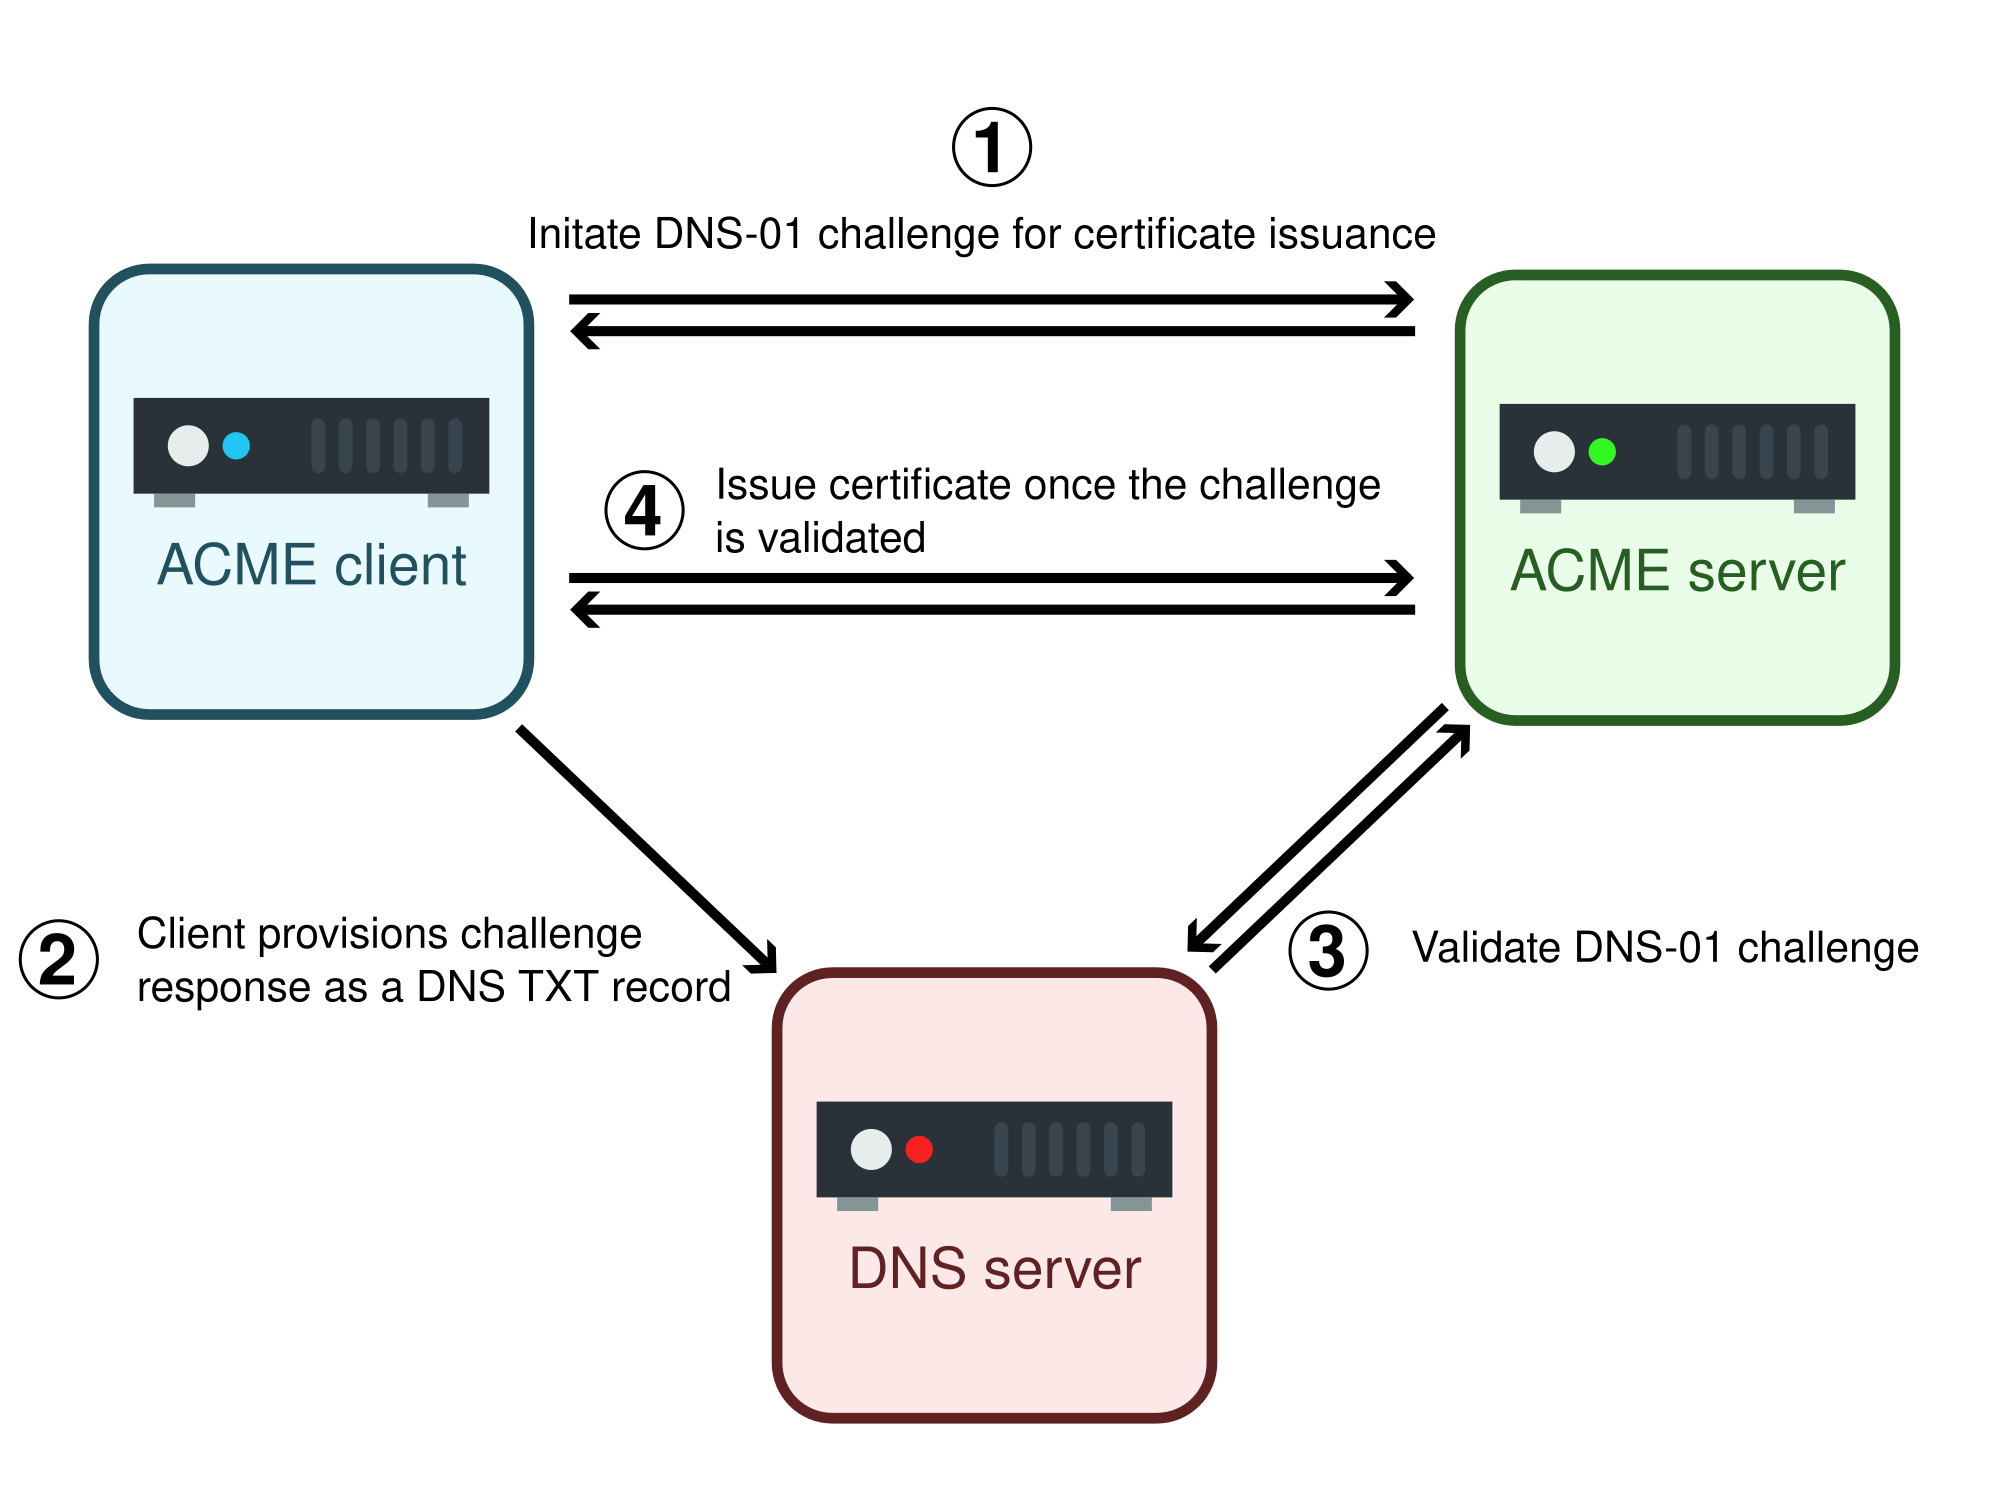 Schematic illustration of the DNS-01 challenge.